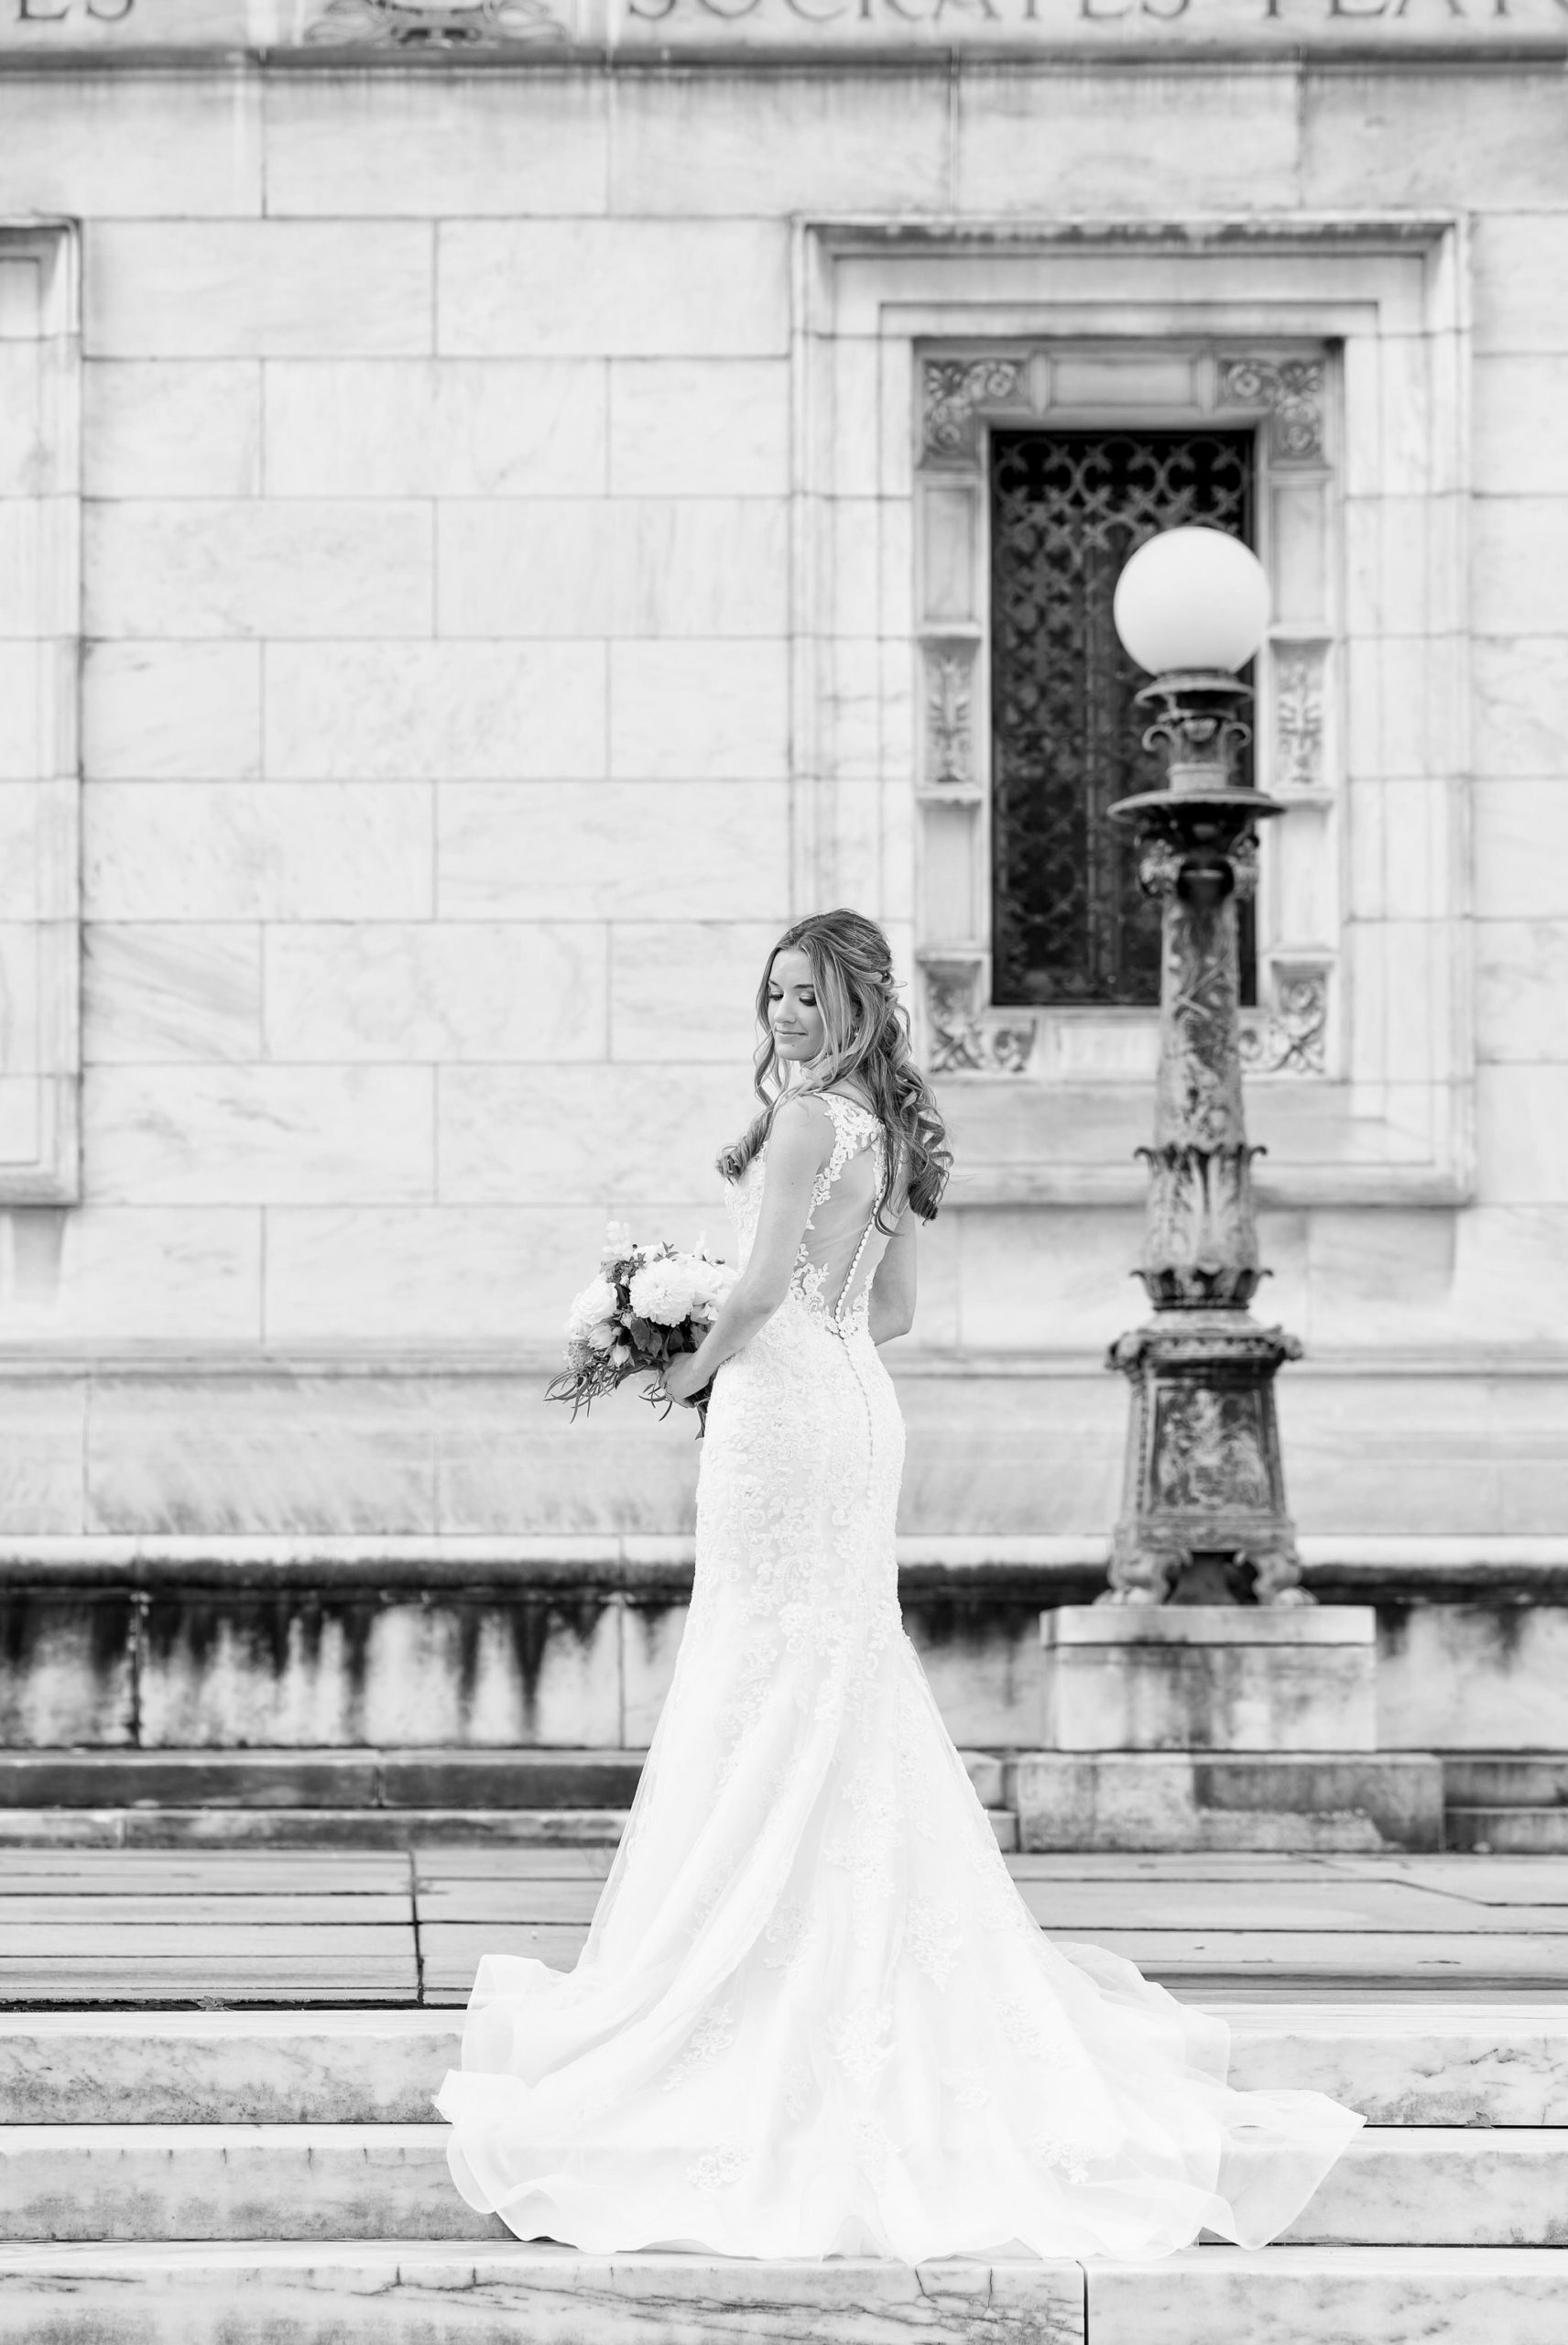 A bride poses, showing off the back of her dress, on the steps of the Detroit Public Library.